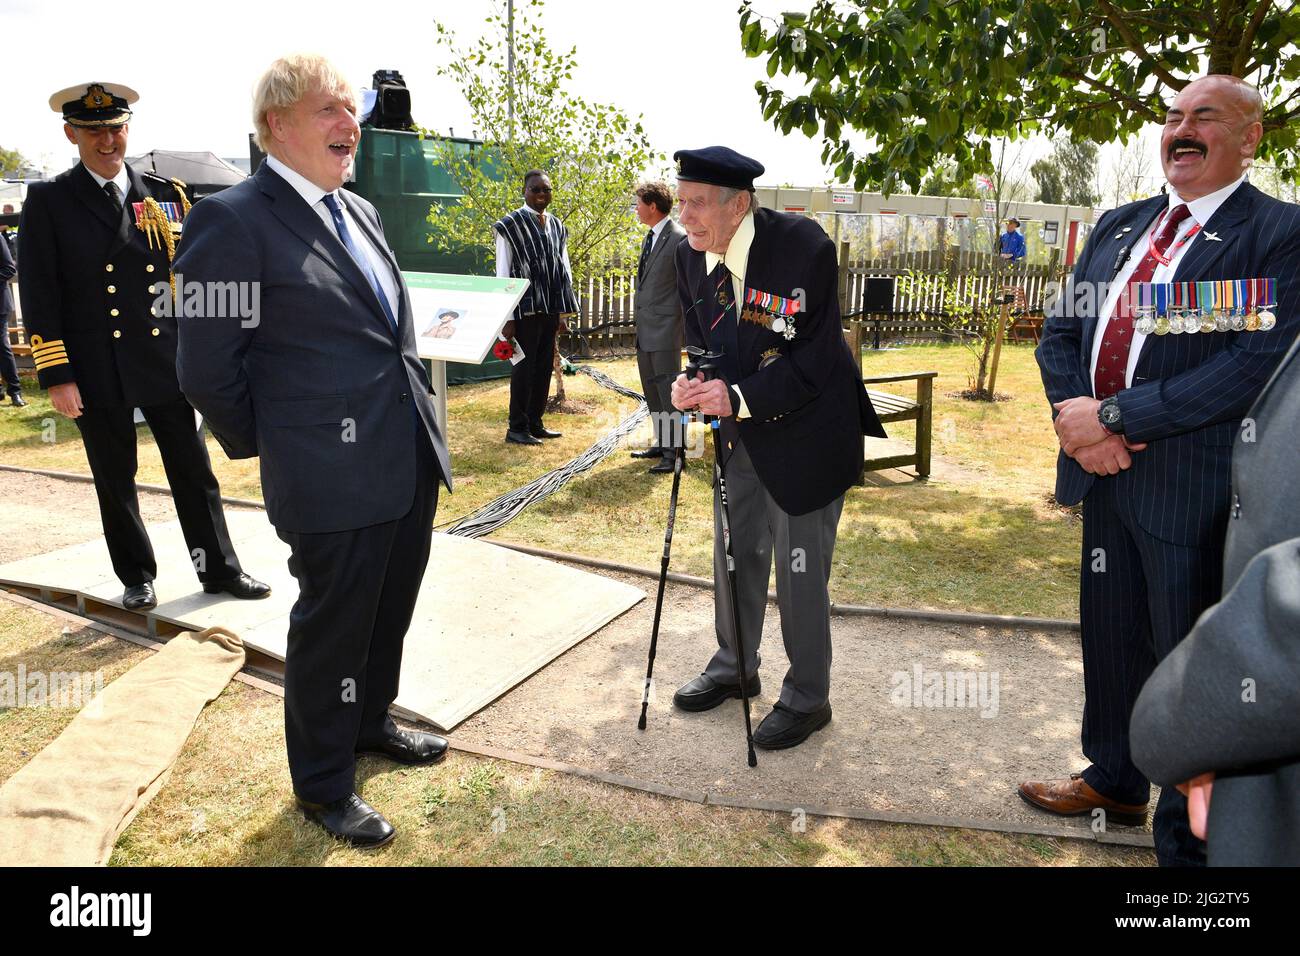 File photo dated 15/08/20 of Prime Minister Boris Johnson meeting veteran Bill Redston following the national service of remembrance marking the 75th anniversary of VJ Day at the National Memorial Arboretum in Alrewas, Staffordshire. Boris Johnson will publicly announce his resignation later today, likely before lunchtime, the BBC is reporting. Issue date: Thursday July 7, 2022. Stock Photo